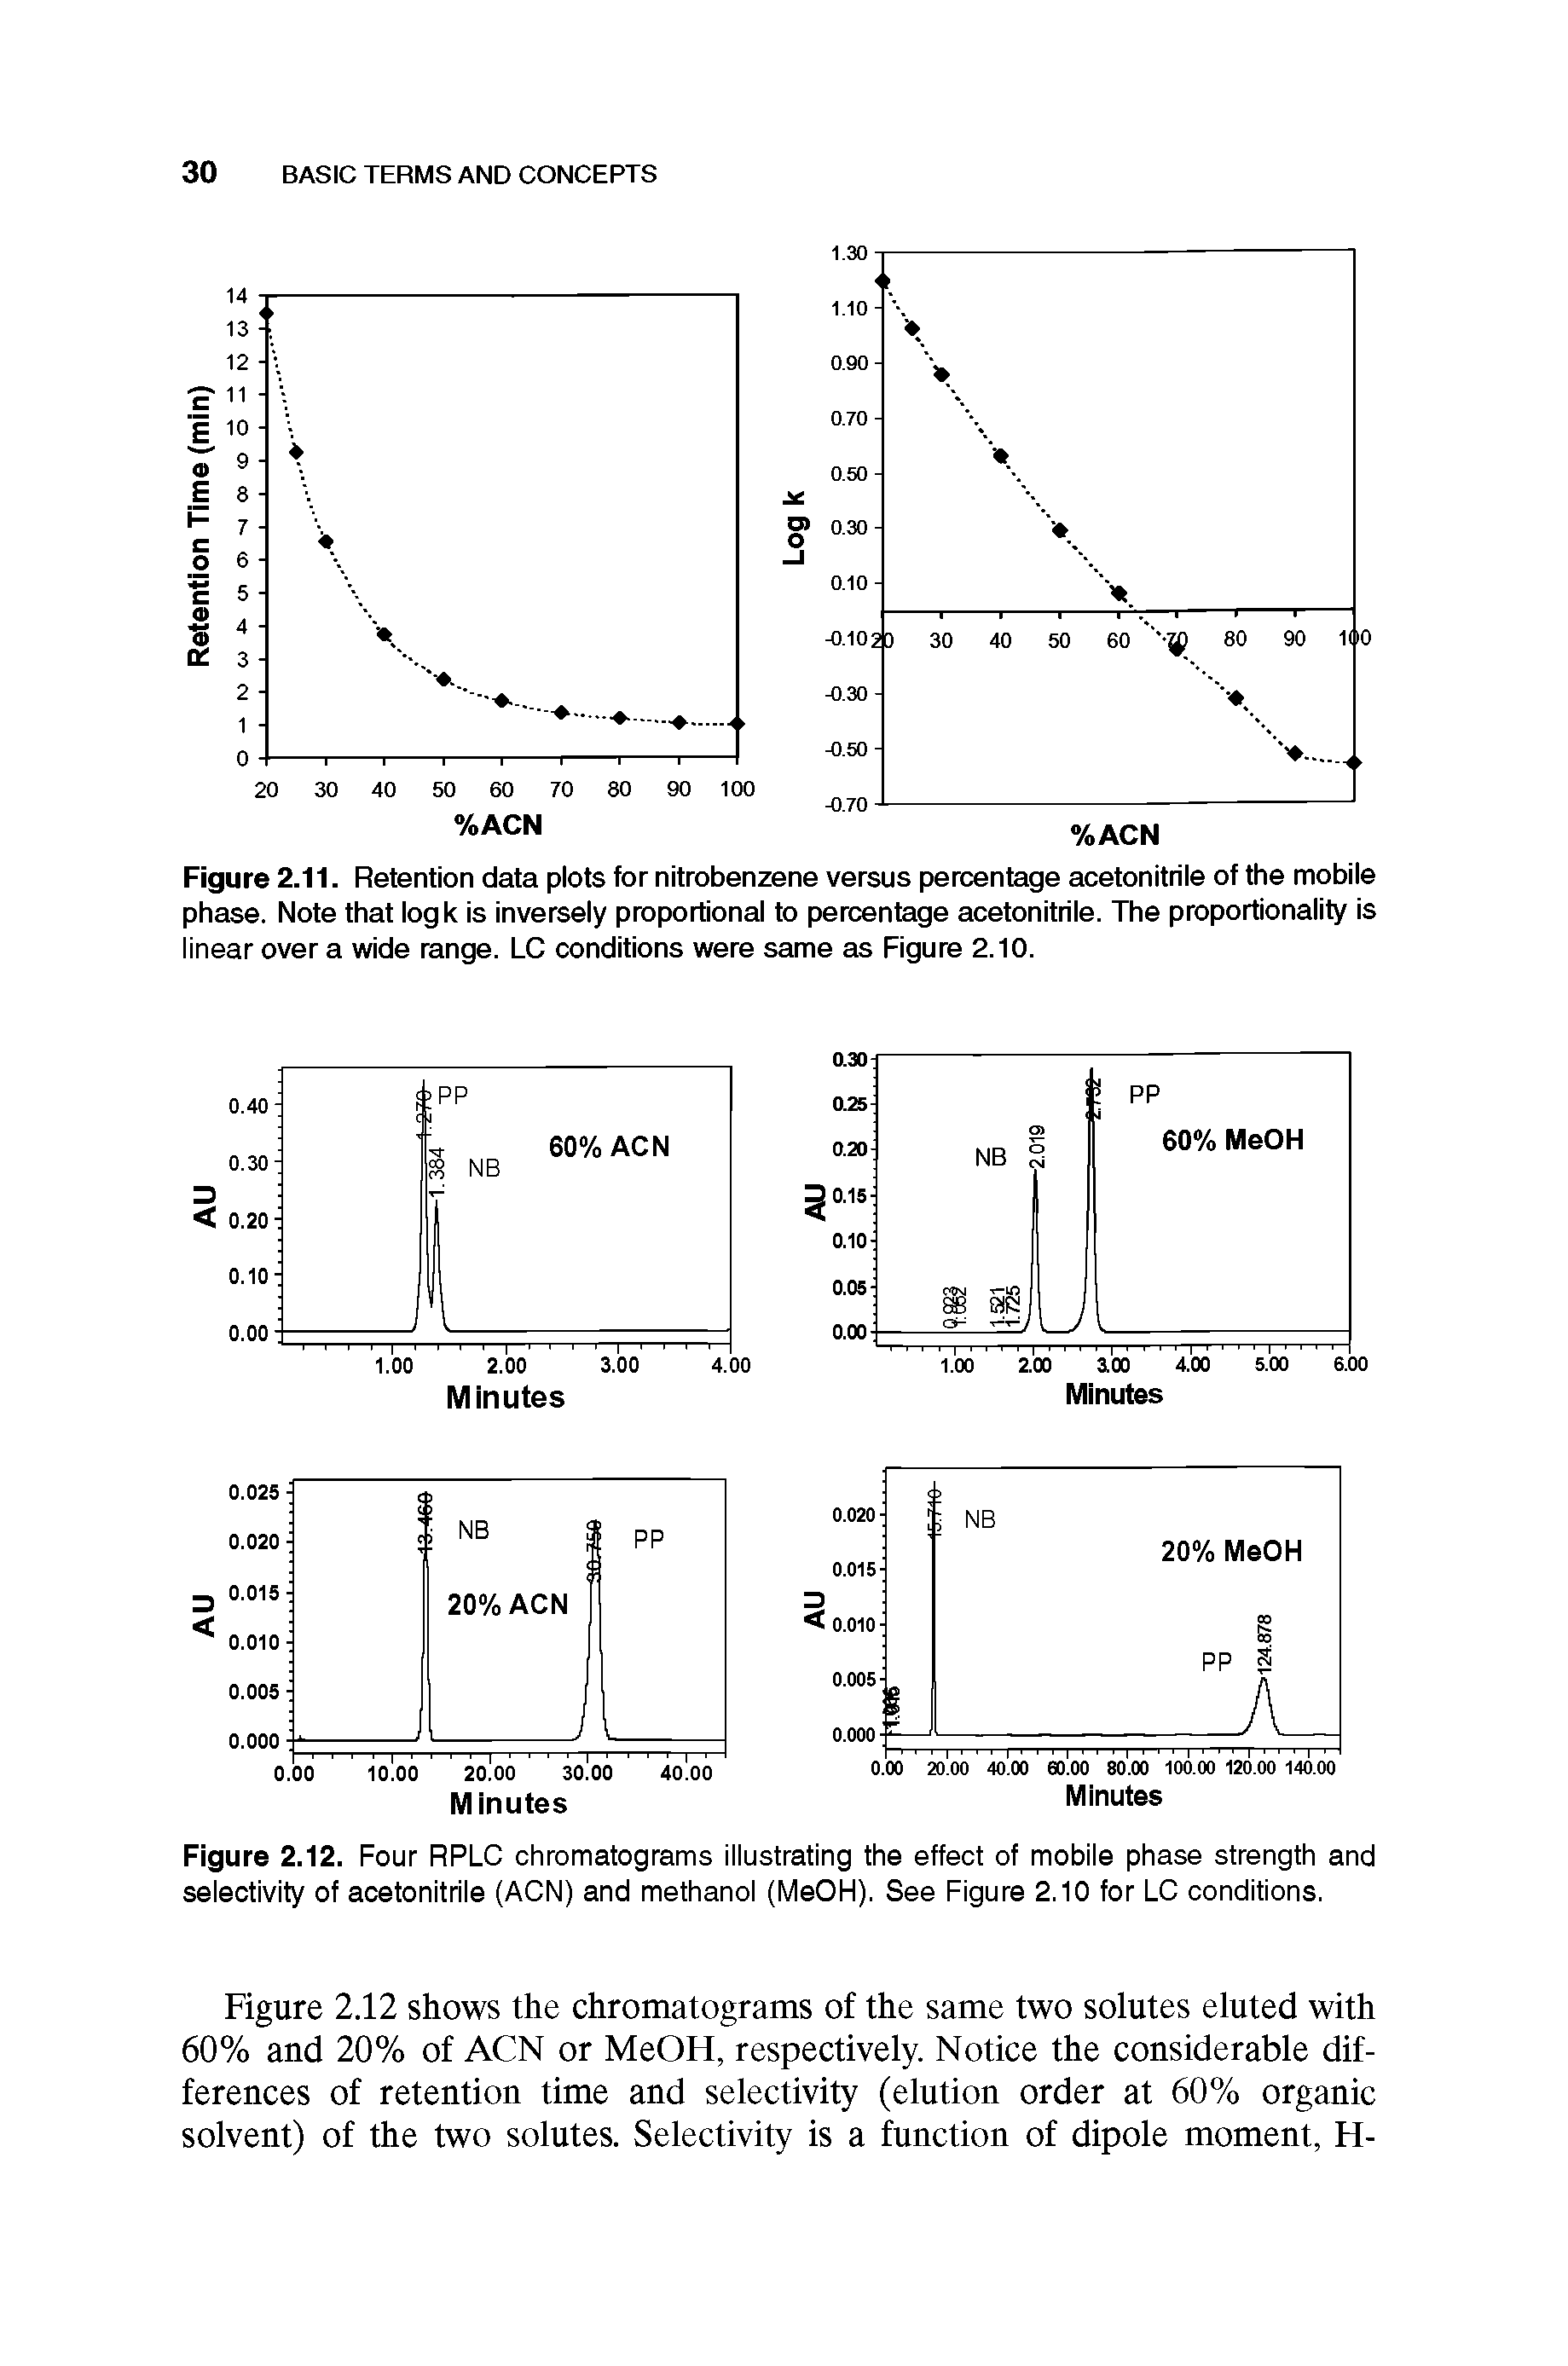 Figure 2.12. Four RPLC chromatograms illustrating the effect of mobile phase strength and selectivity of acetonitrile (ACN) and methanol (MeOH). See Figure 2.10 for LC conditions.